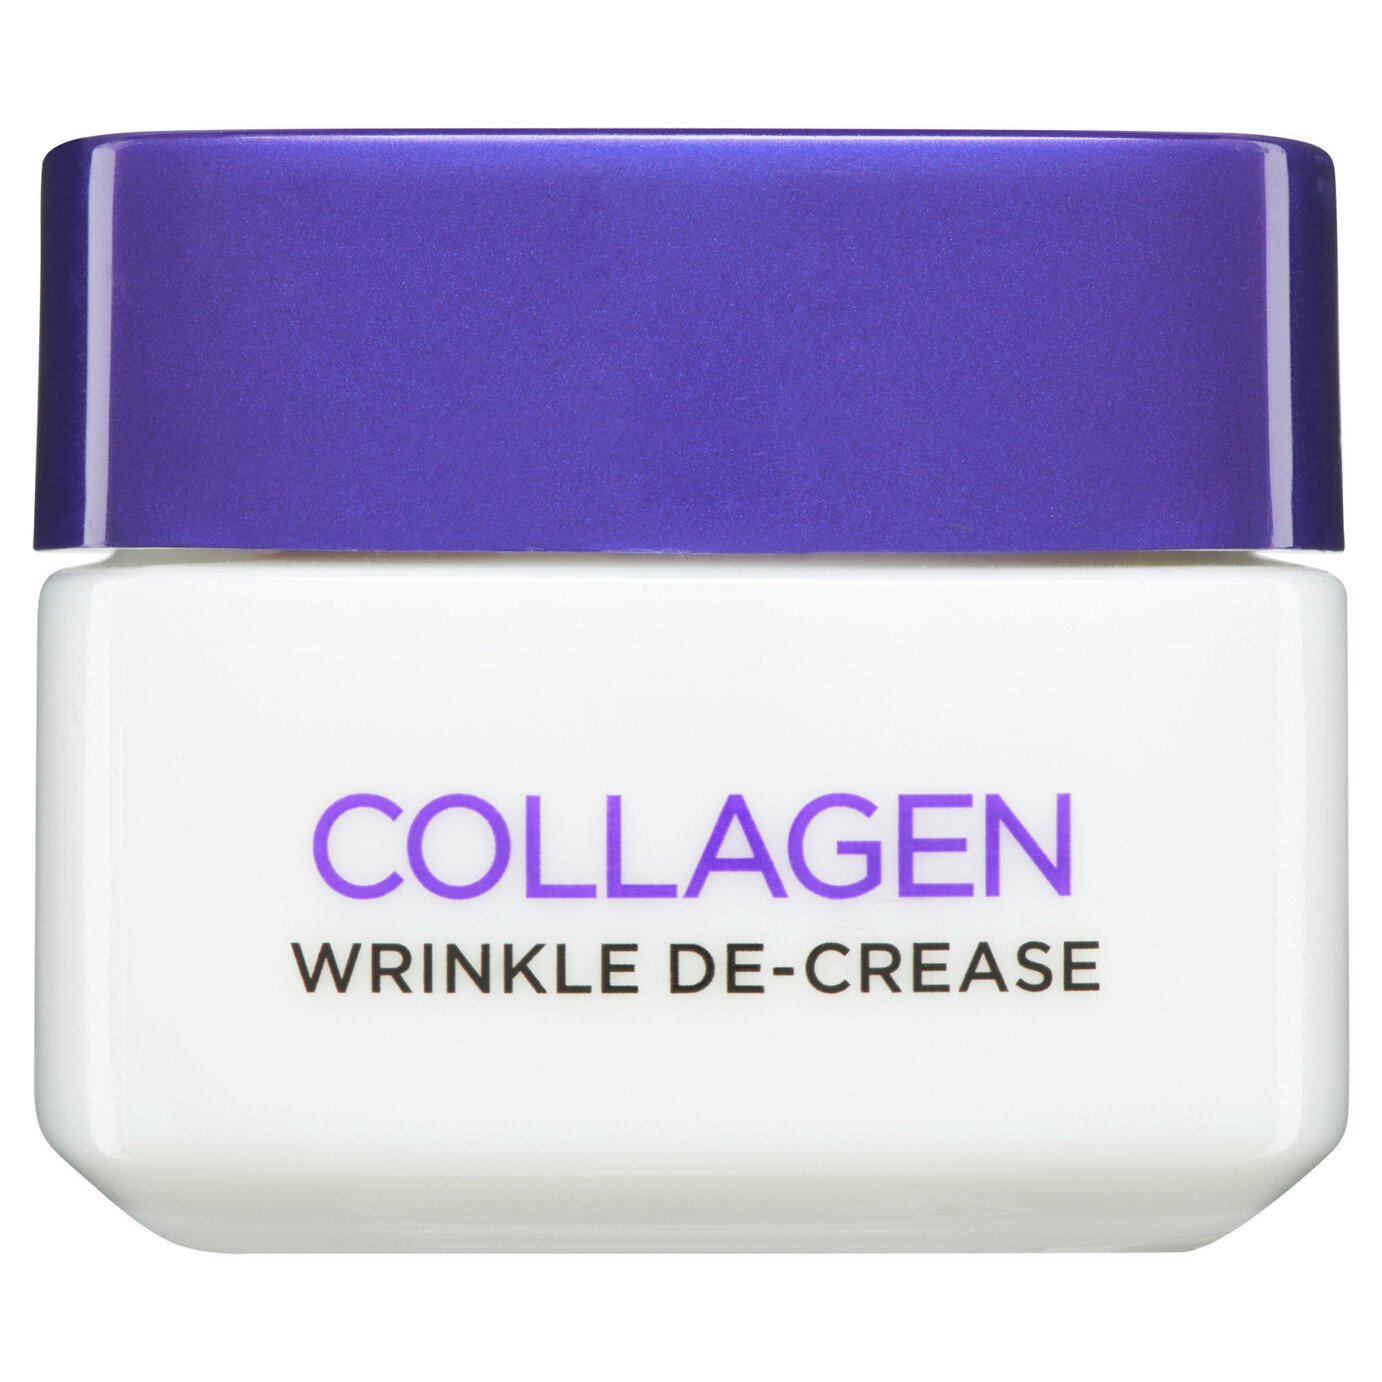 L'Oreal Collagen Wrinkle De-Crease Day Cream Review